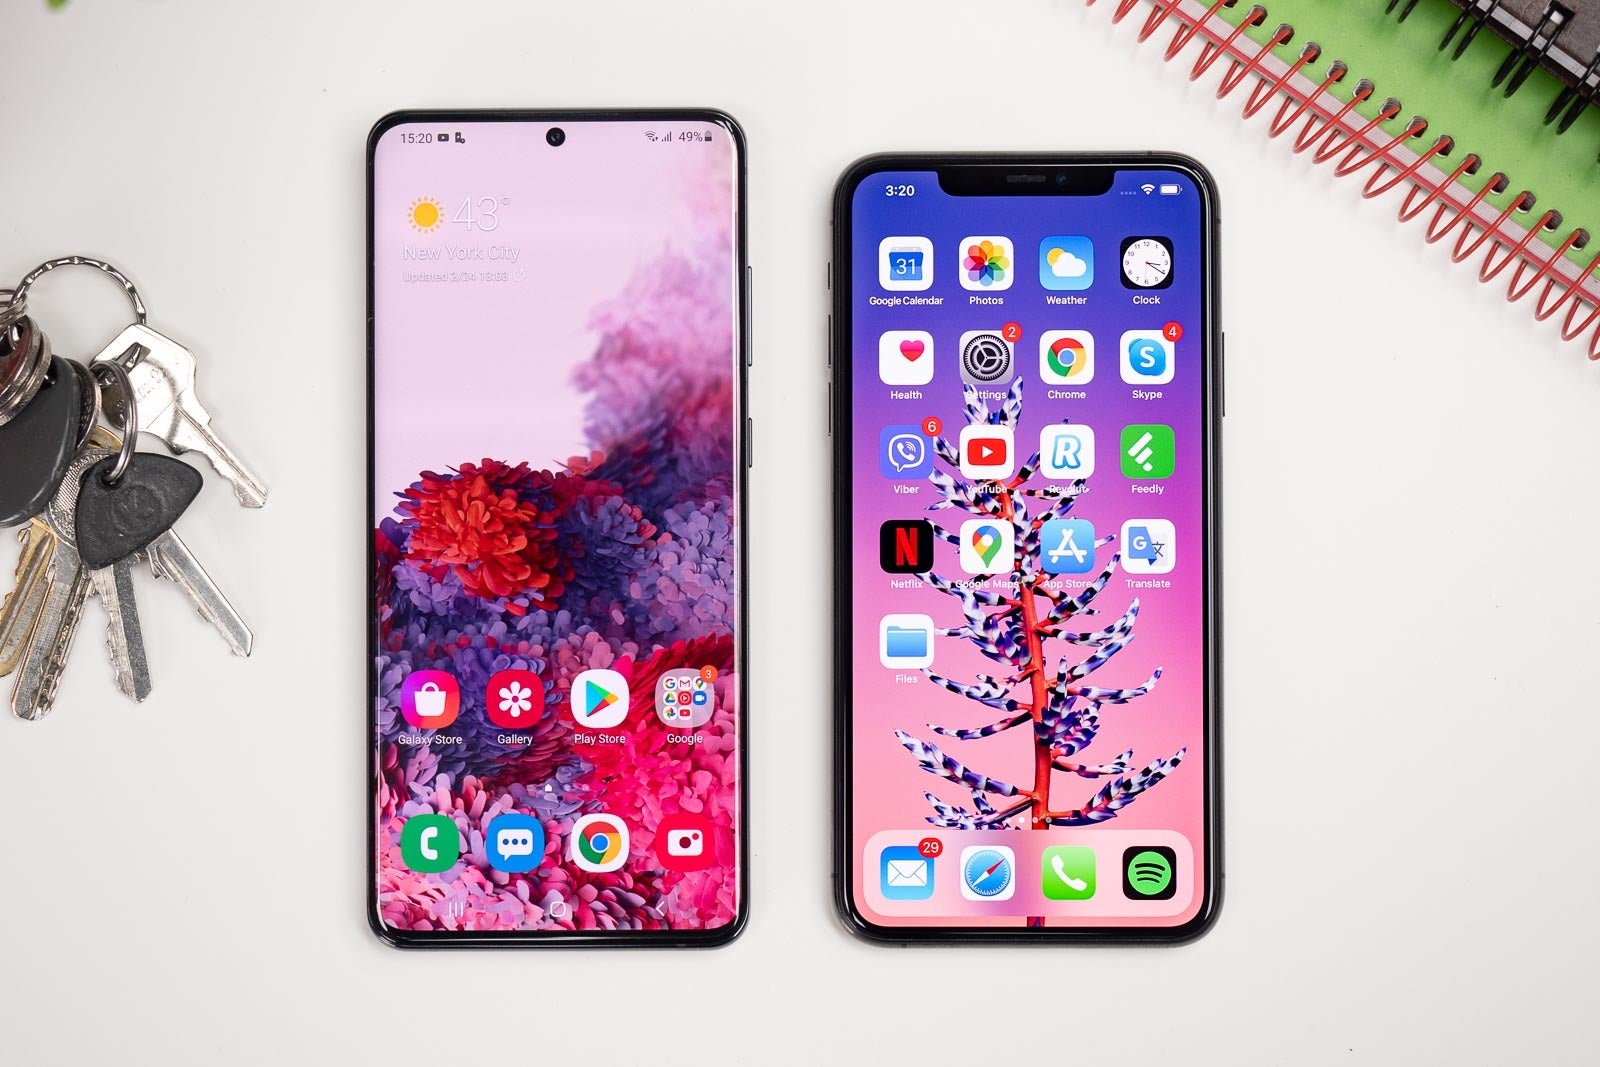 The Samsung Galaxy S20 Ultra and Apple iPhone 11 Pro Max - Samsung shareholders: why can't you be more like Apple?